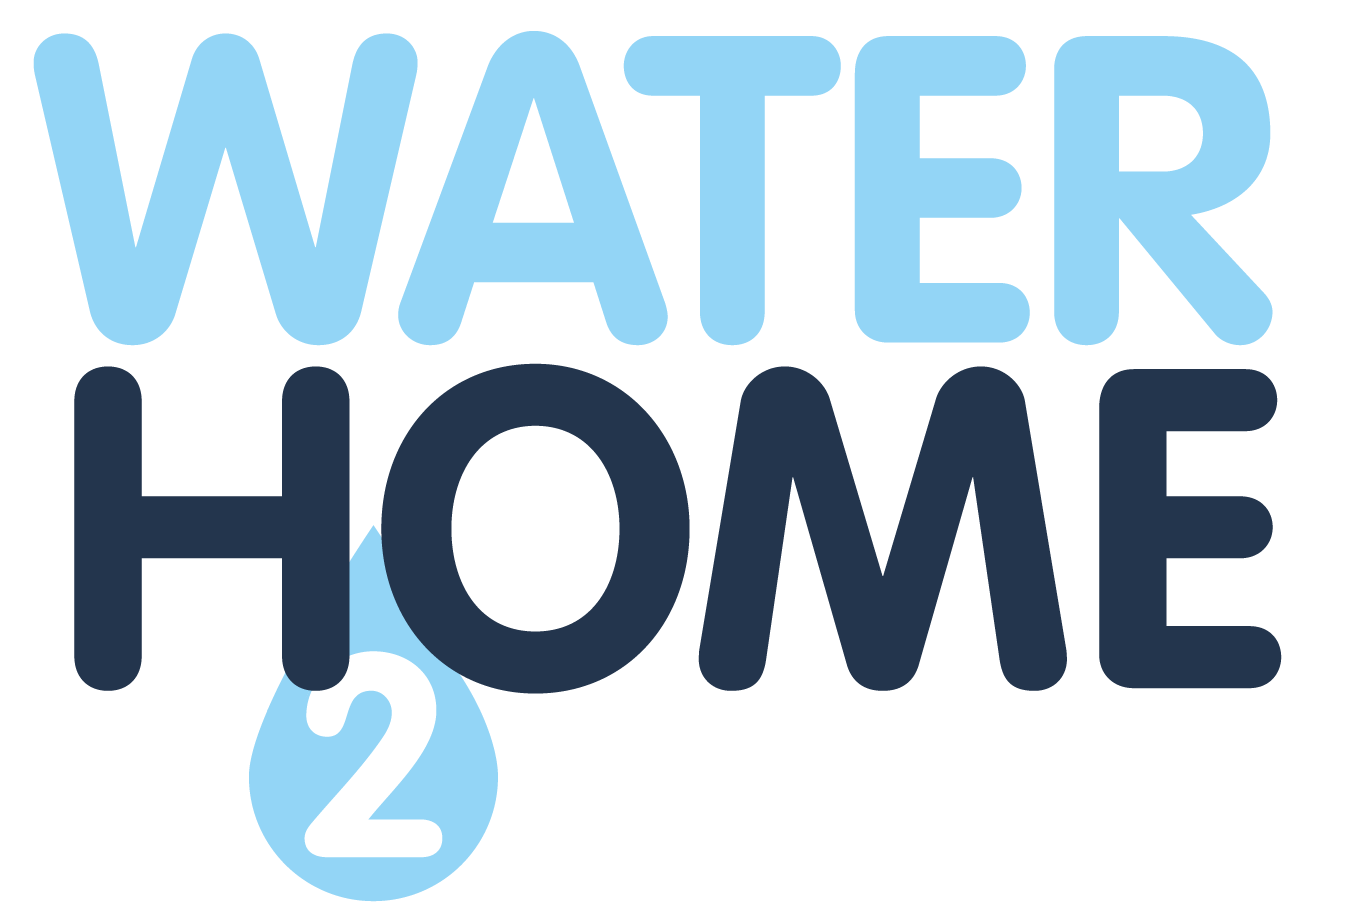 Water Home